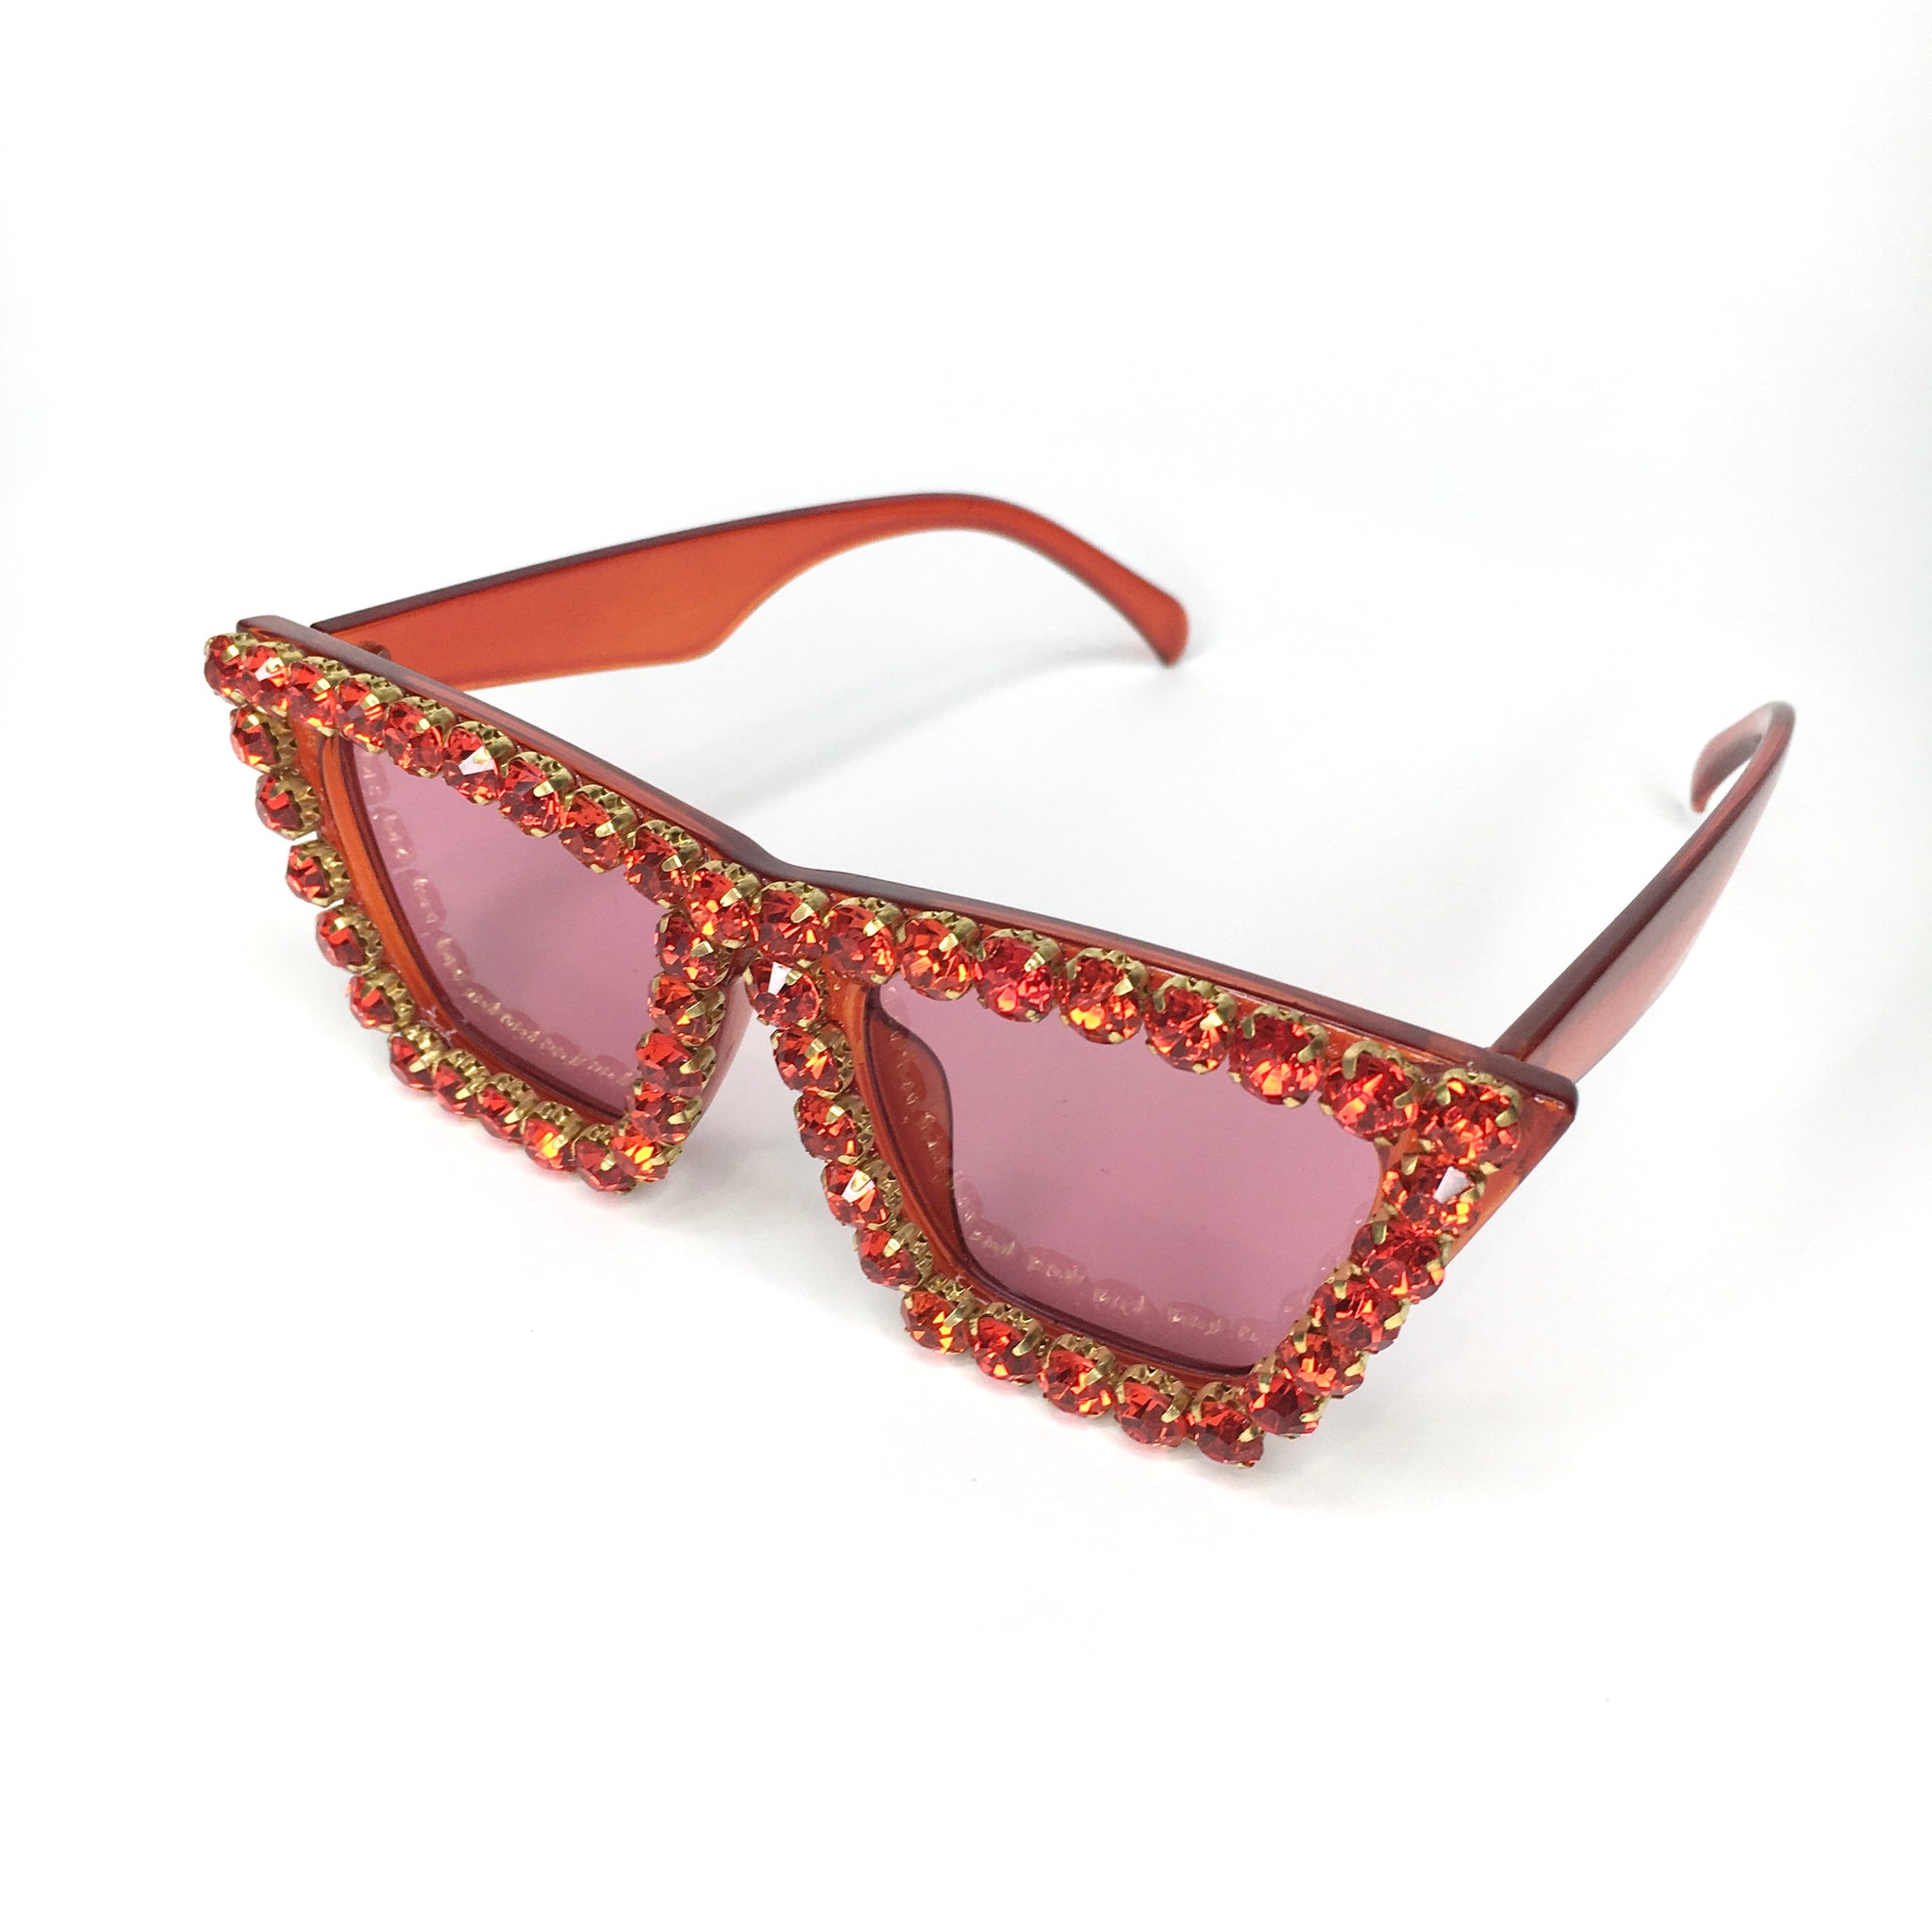 Sunnies / Blinged Out Bookworm